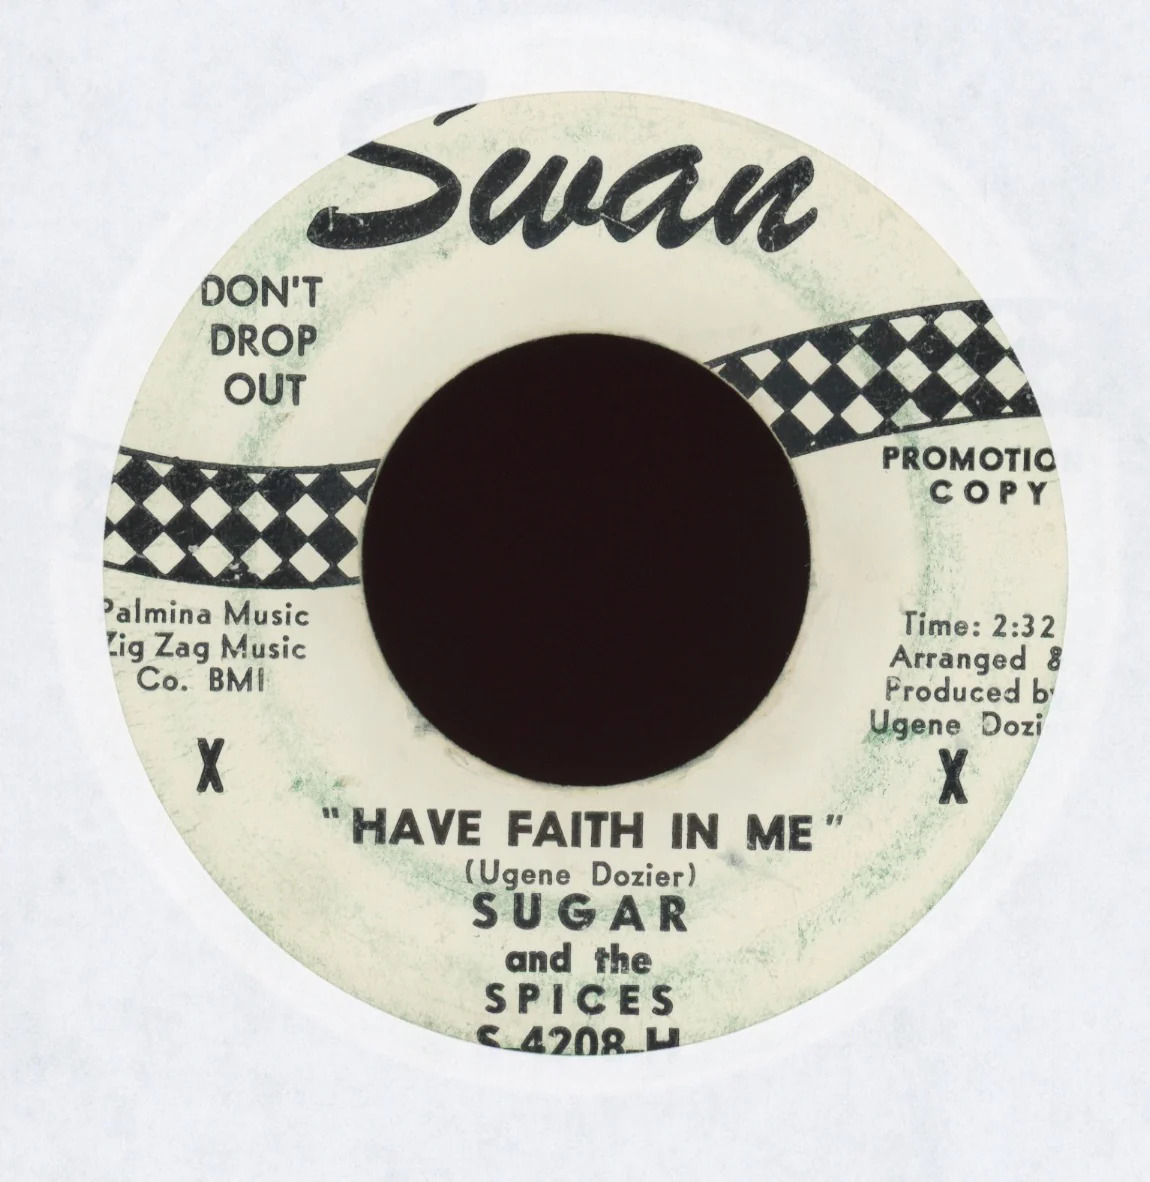 Sugar & The Spices - Have Faith In Me on Swan Promo Northern Soul 45